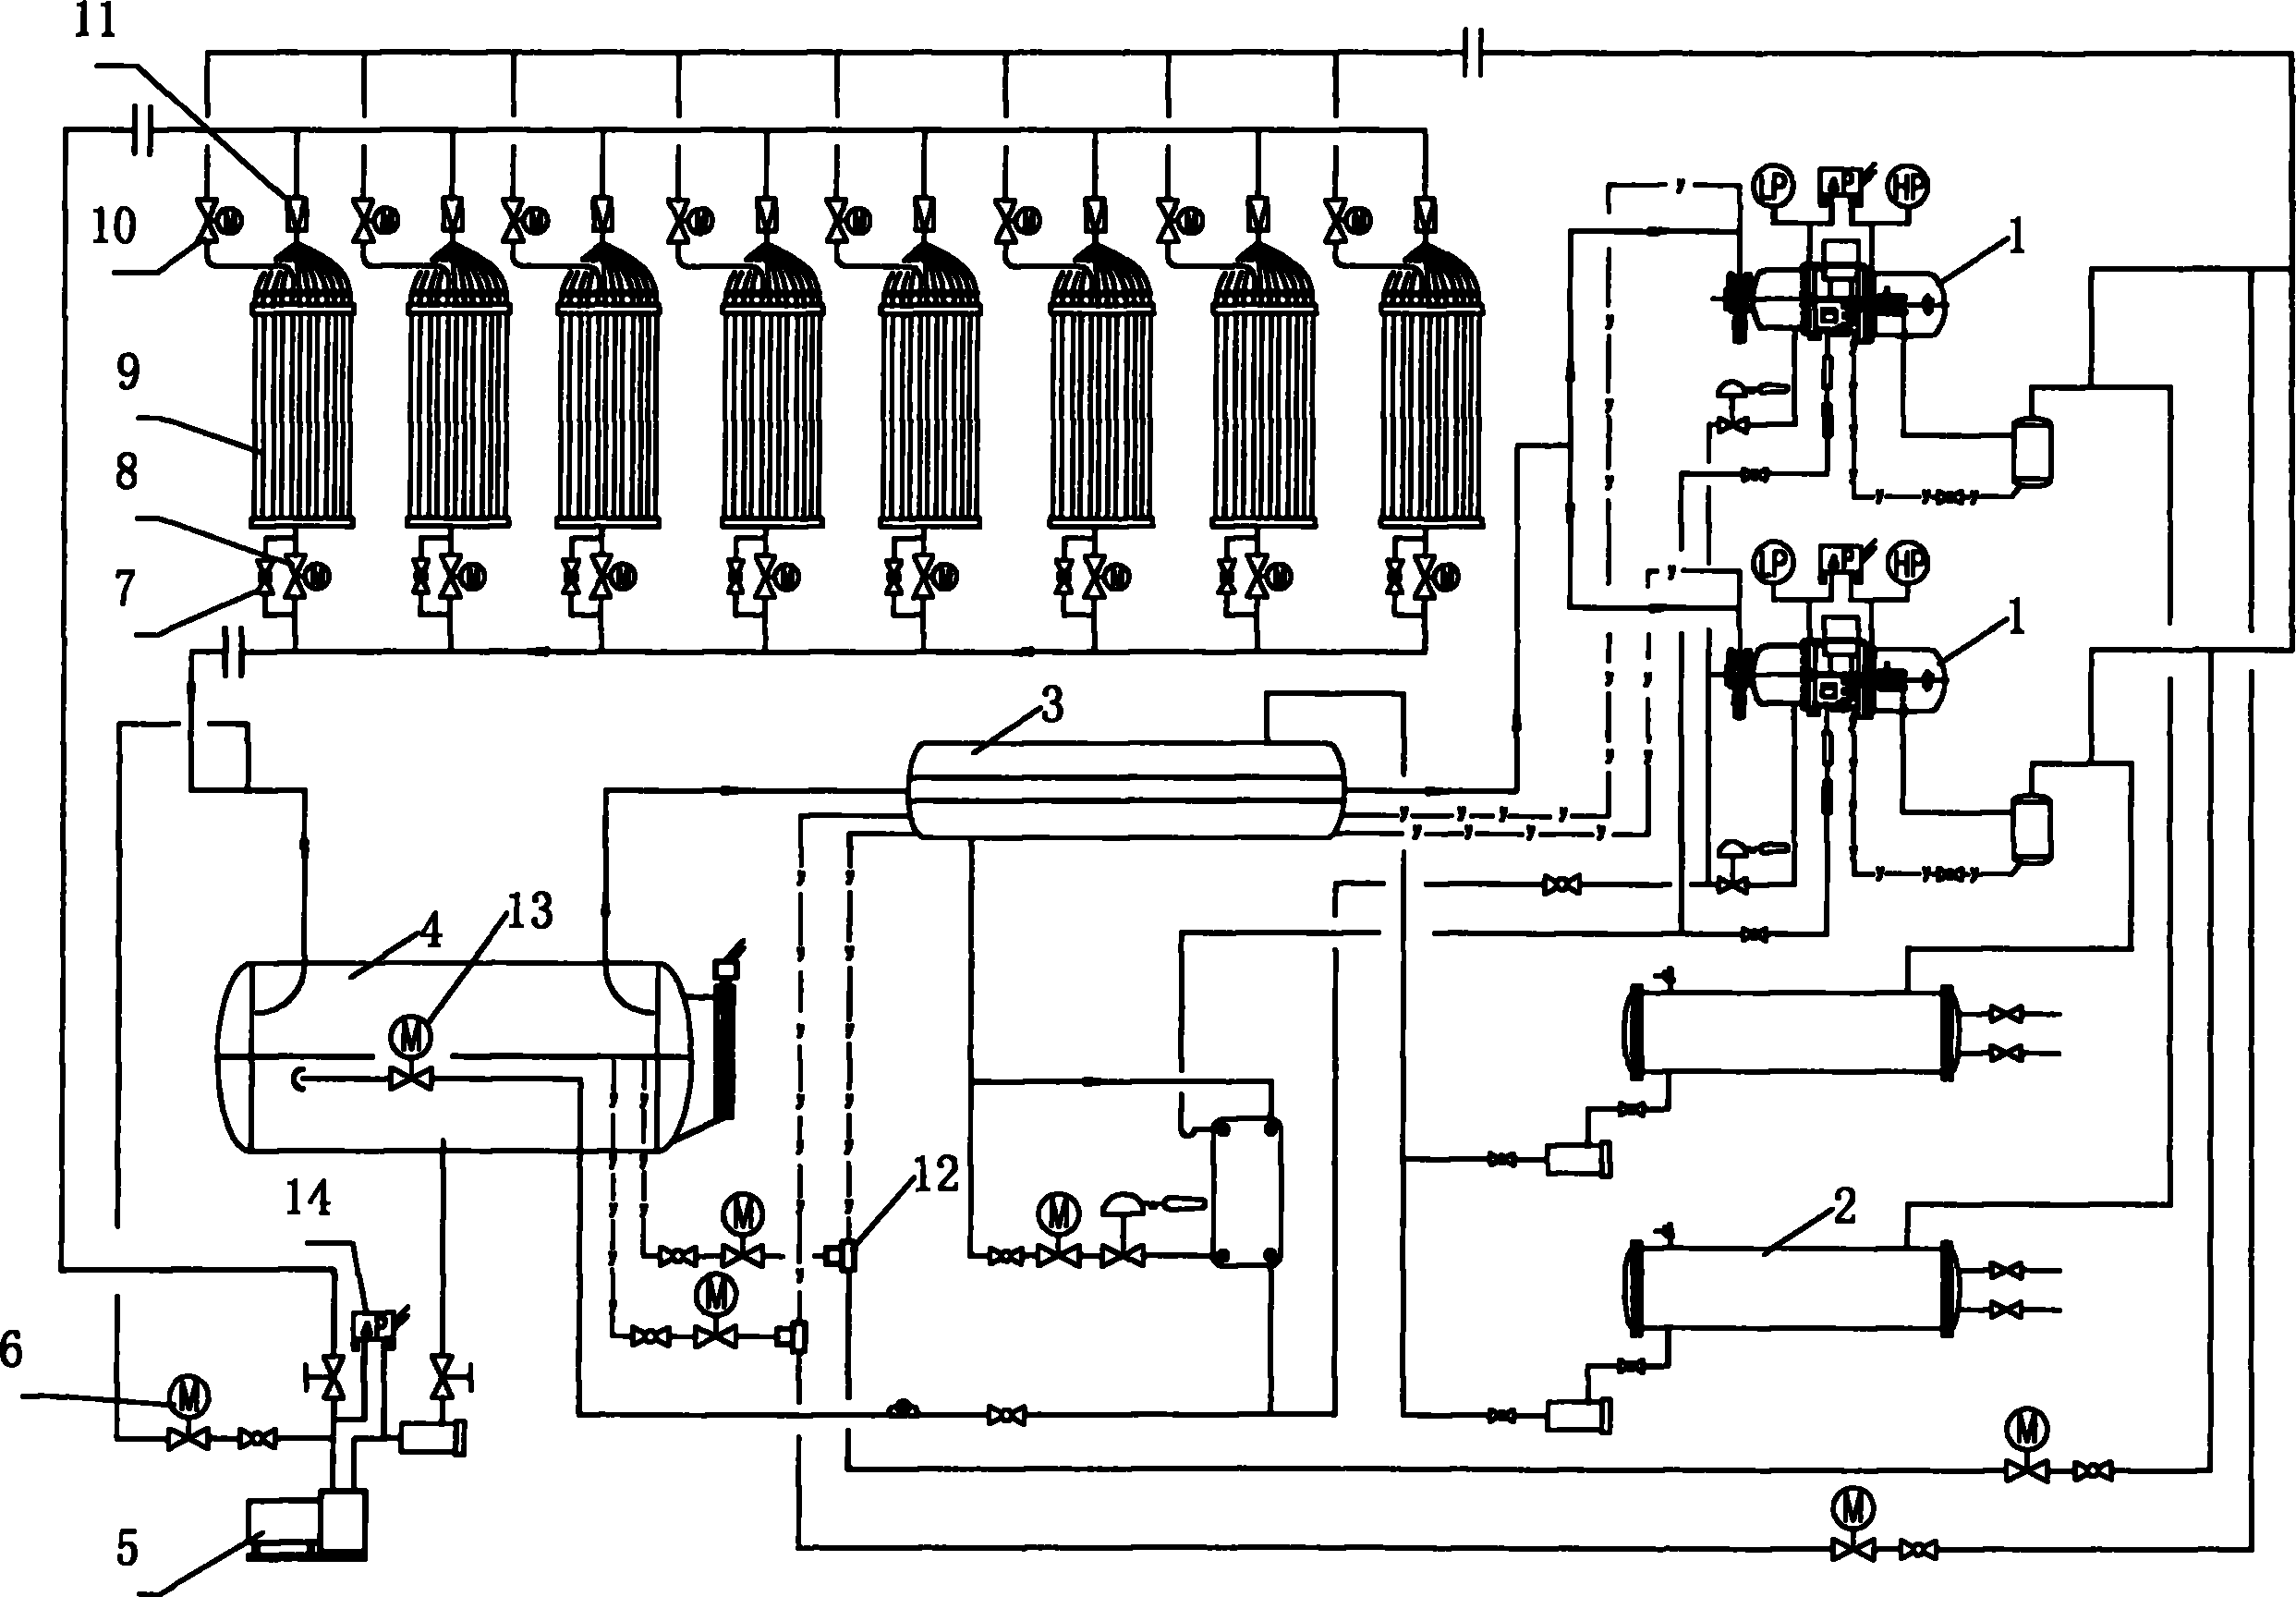 Dual working condition refrigeration system for making ice and cold water